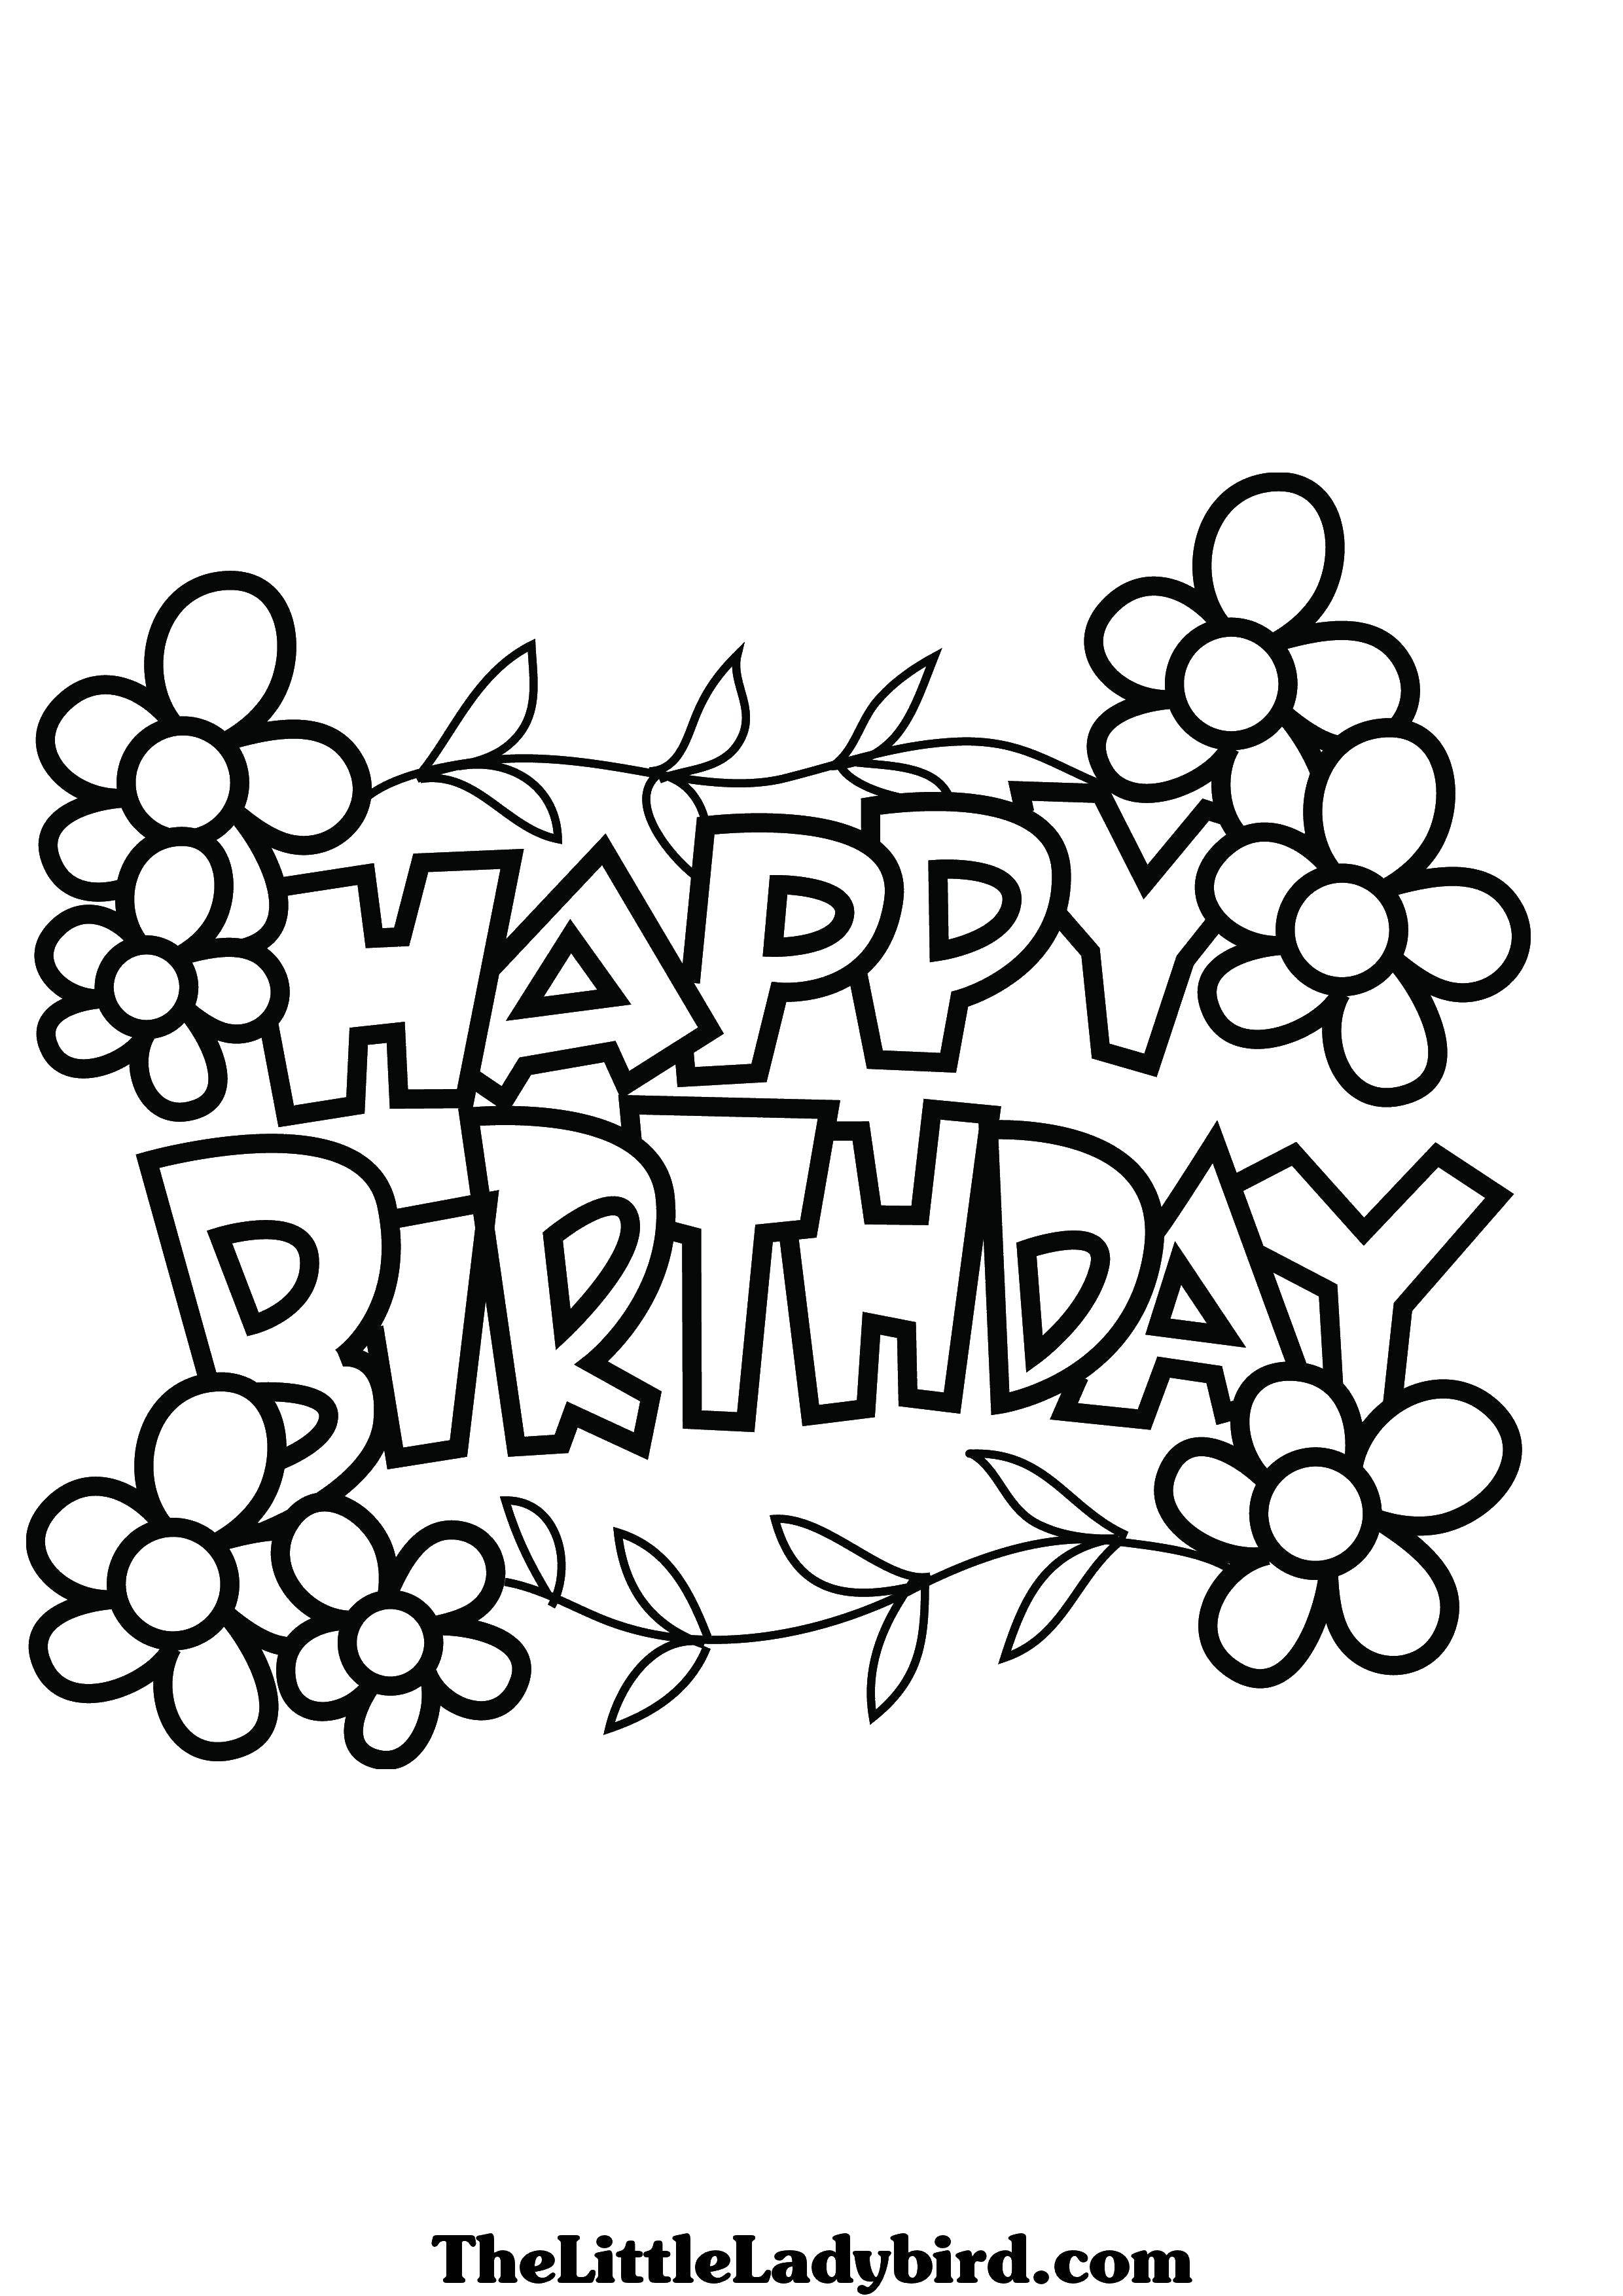 Coloring Happy birthday. Category happy birthday inscription. Tags:  with birthday.